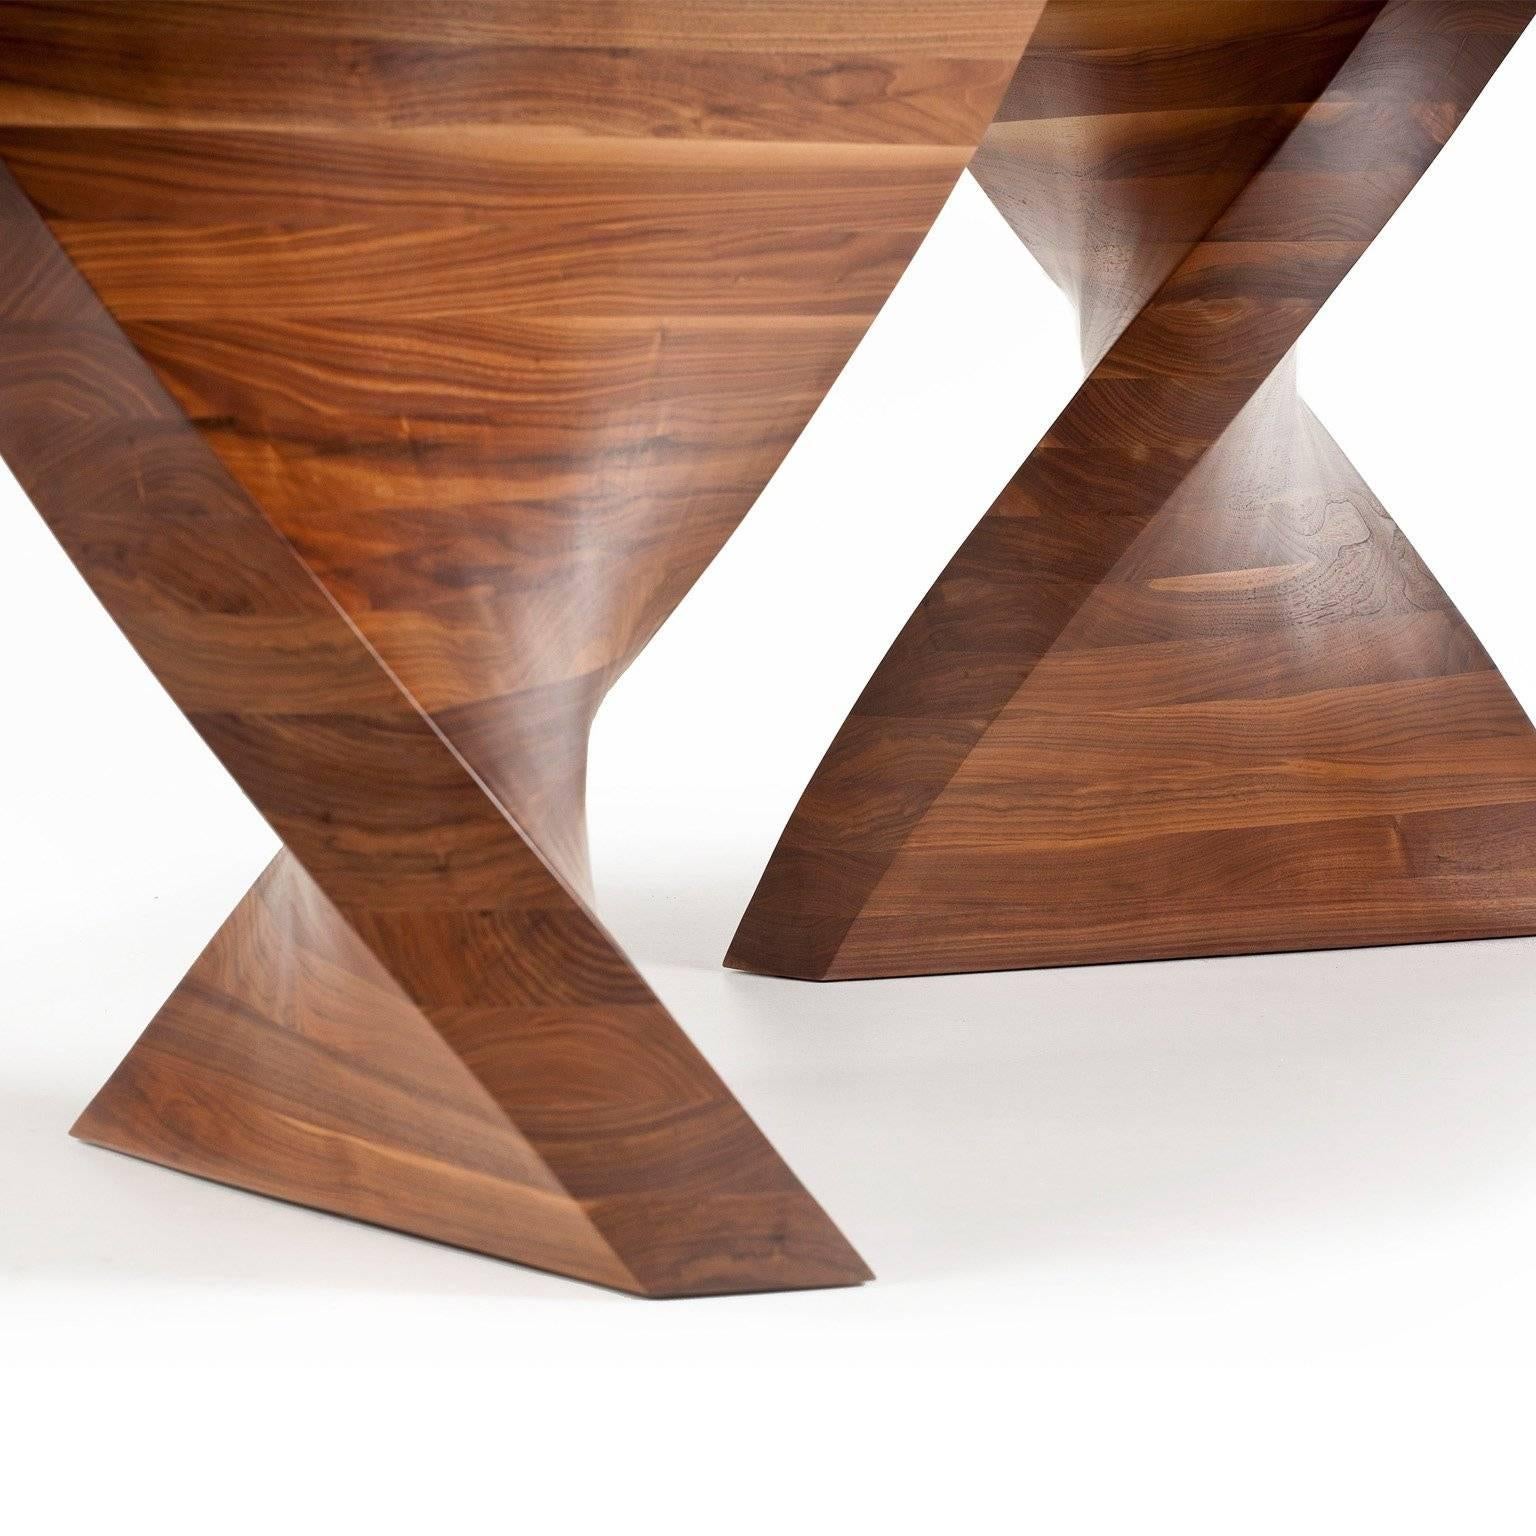 A statement dining table created using the finest of technique, craftsmanship and finish. 

Designed and crafted by Dunleavy Bespoke in Ireland in the most beautiful American Black Walnut. This organic-inspired sculpted table would be the perfect